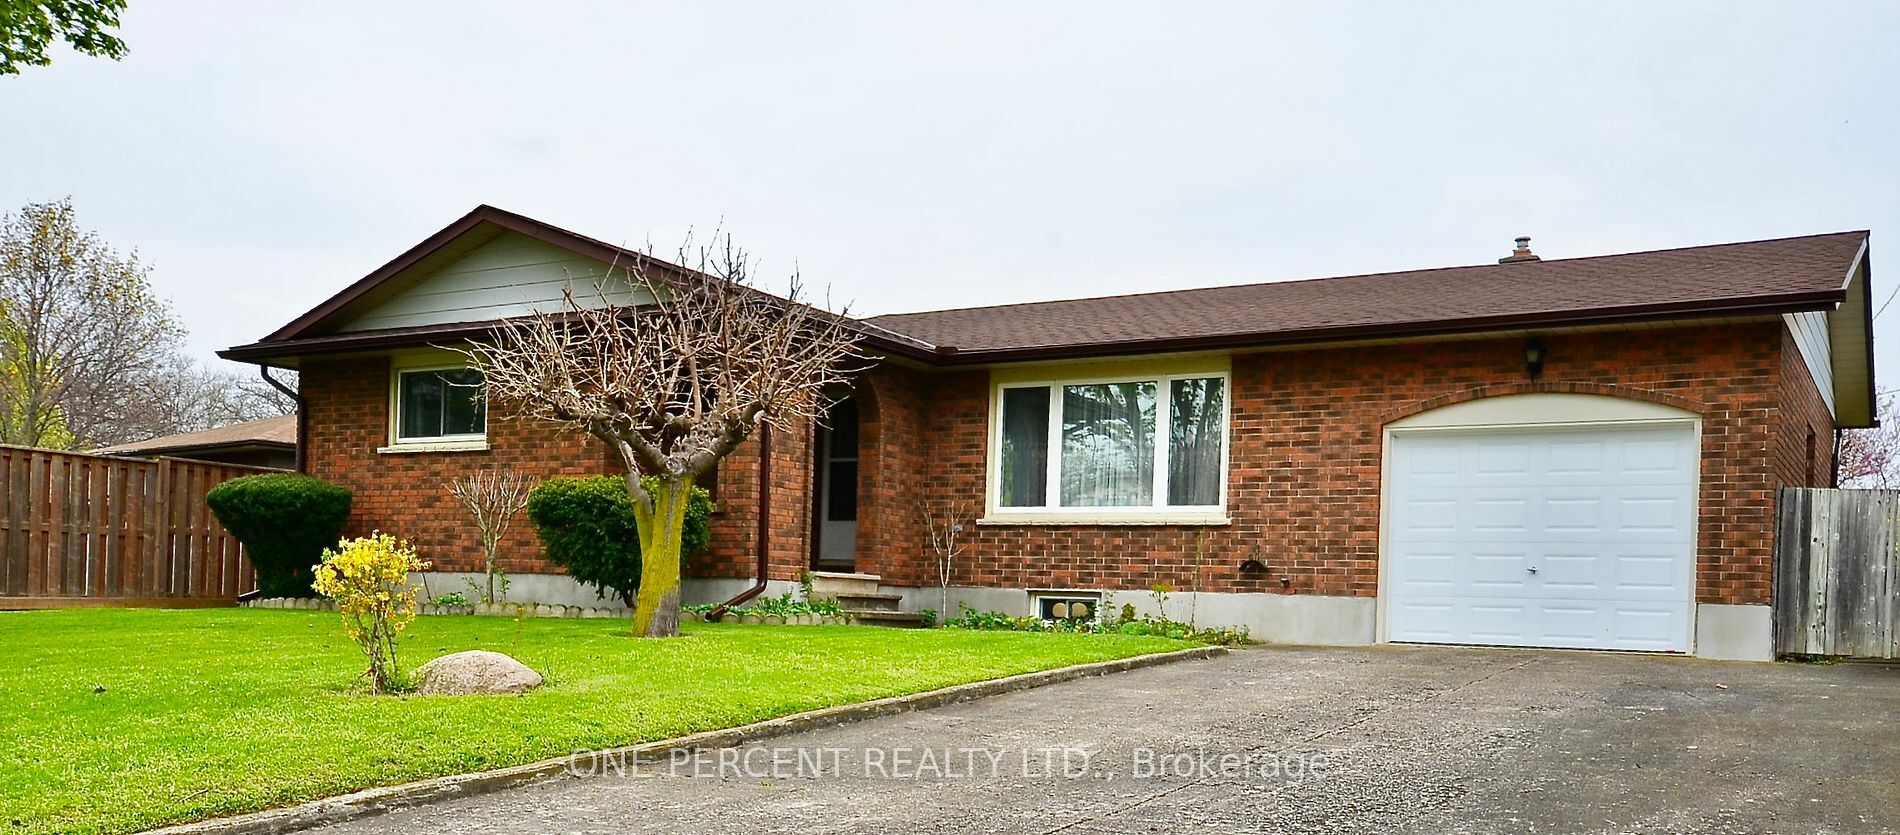 24 Shade Tree Cres  St. Catharines ON L2M 7G5 photo